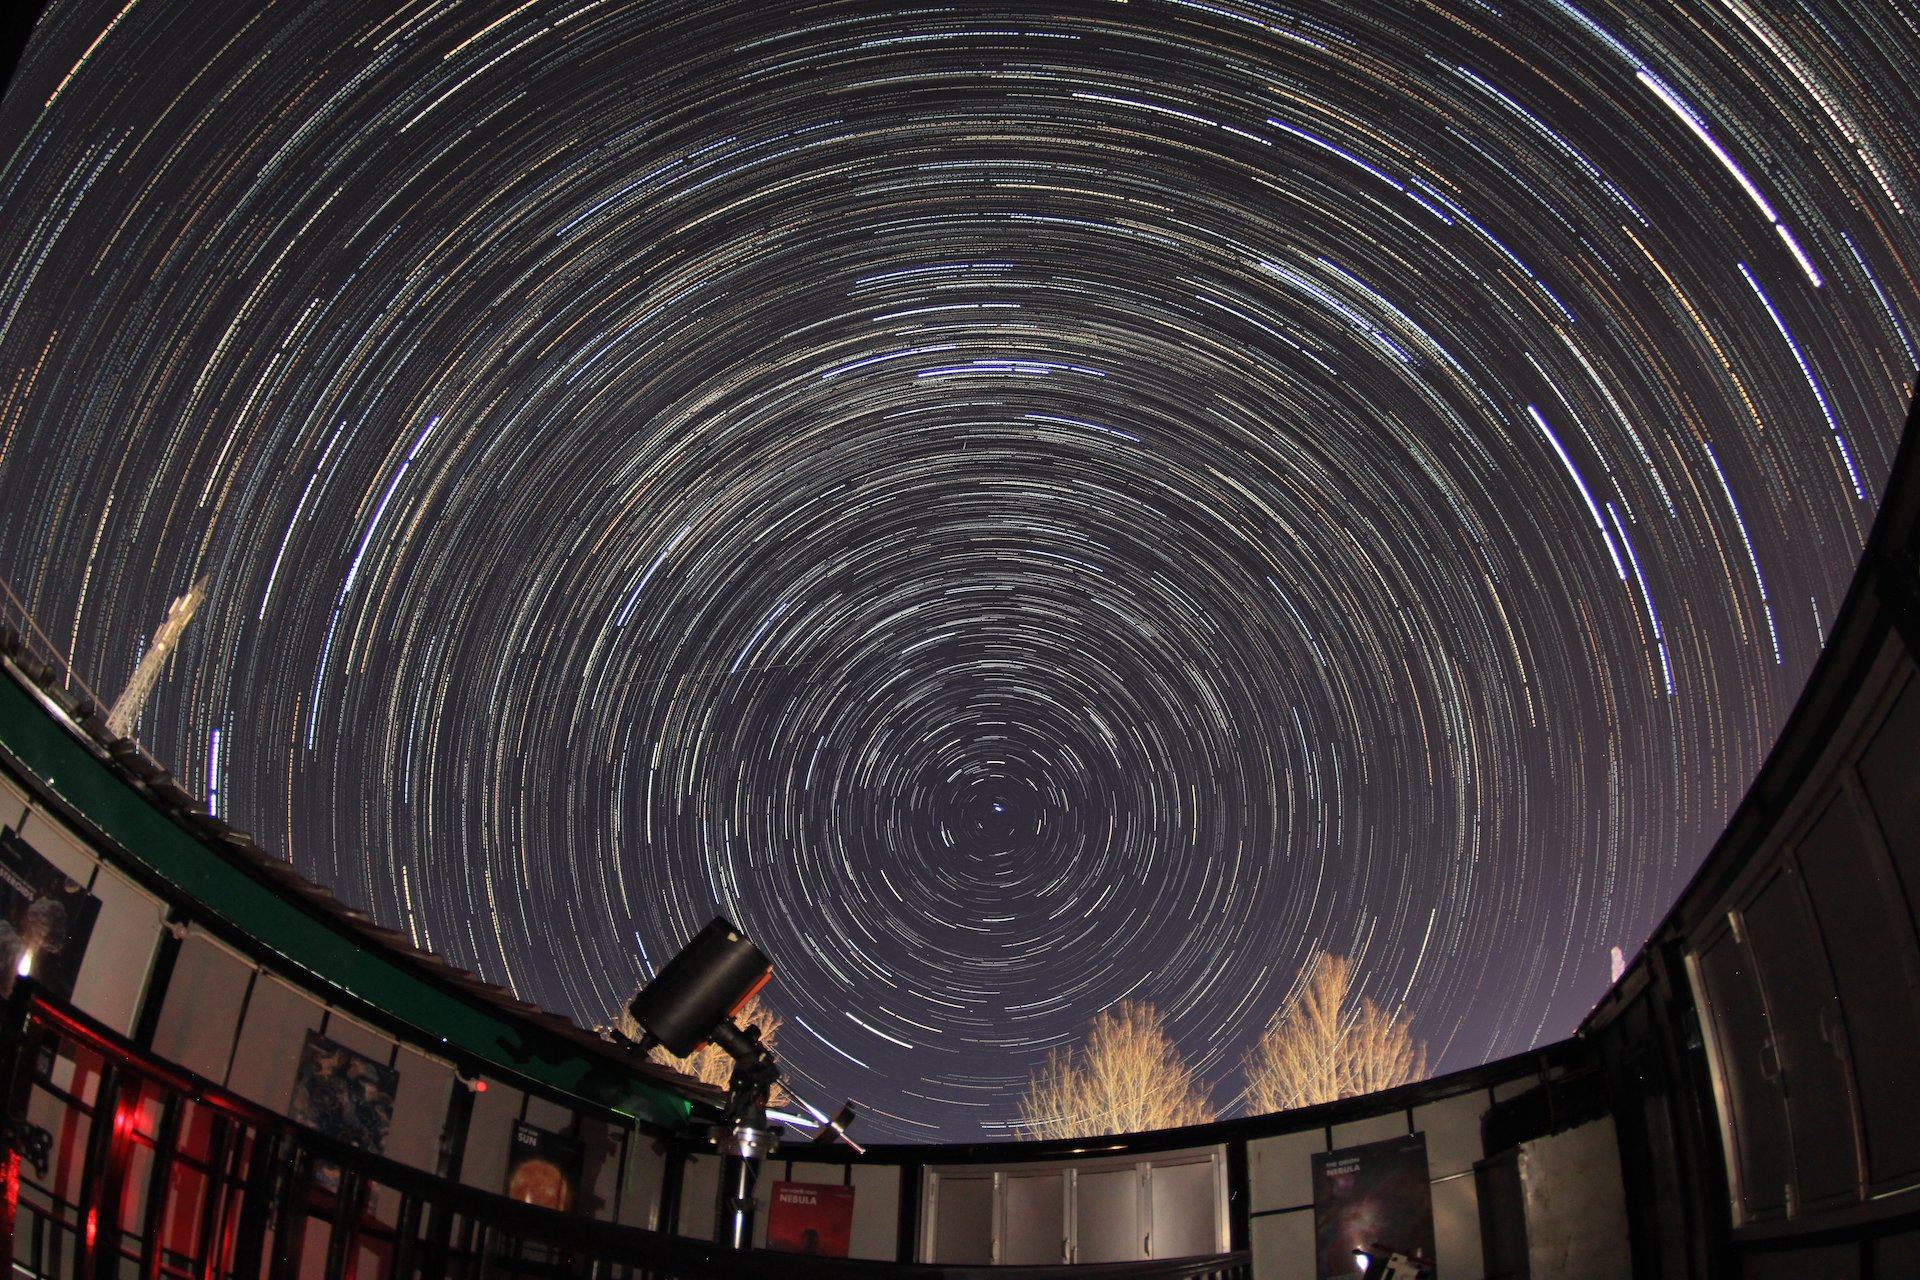 An image of star trails, which shows the motion of the stars over the sky during a period of several hours.
Photo: Starscapes